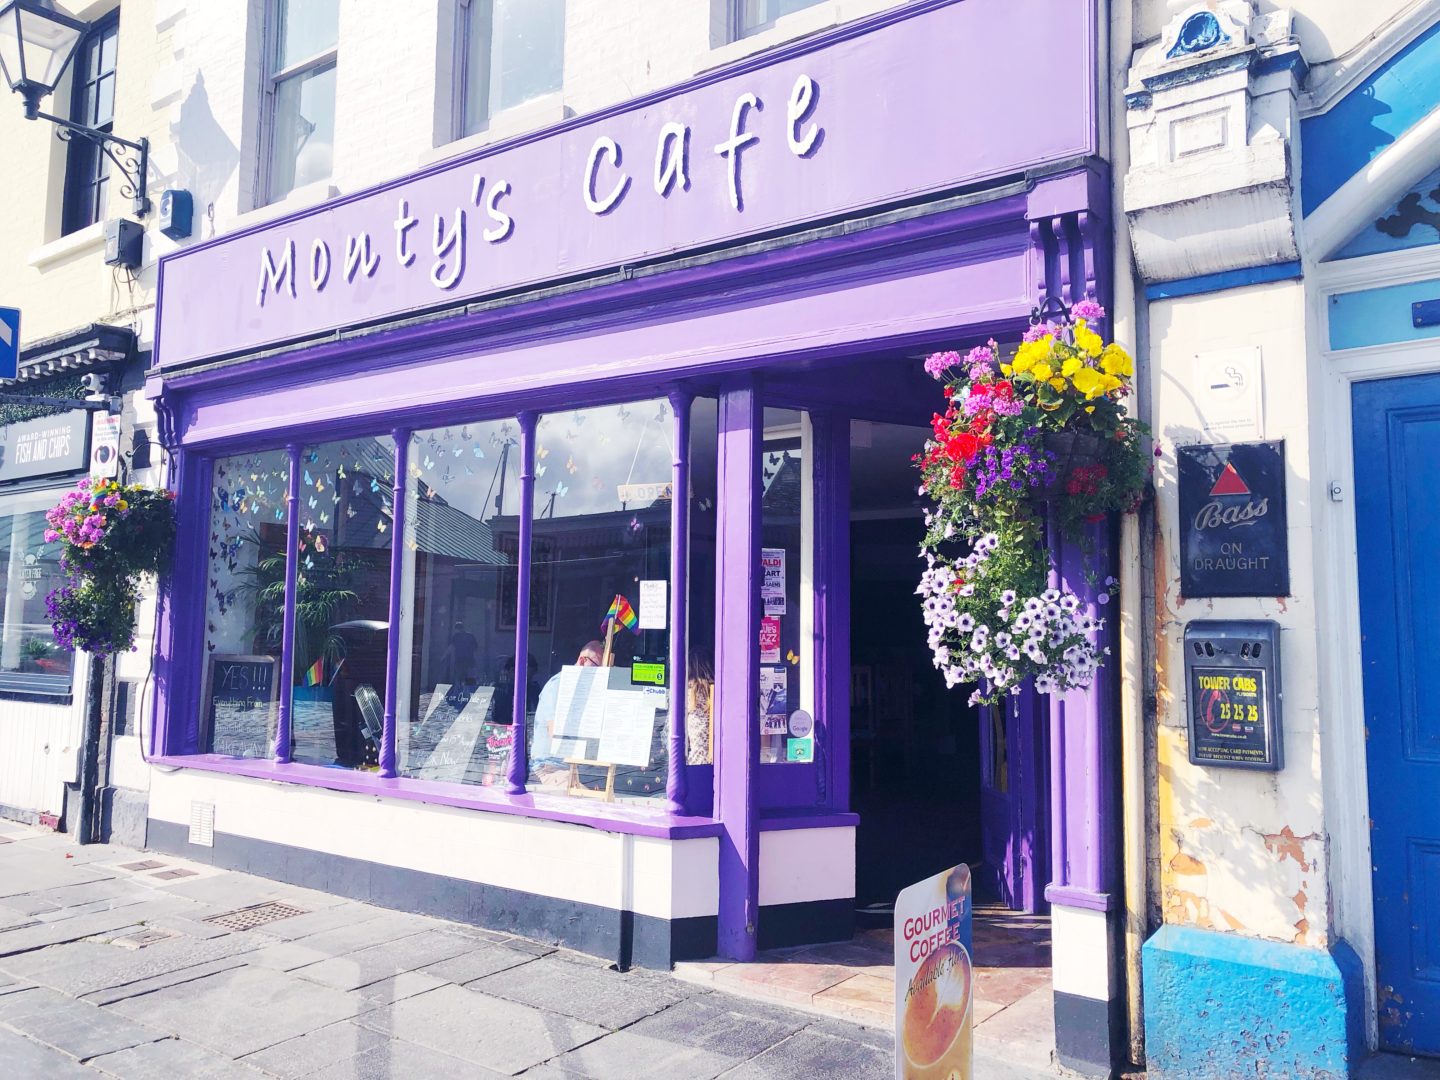 Gluten Free Breakfast at Monty’s Cafe, Plymouth